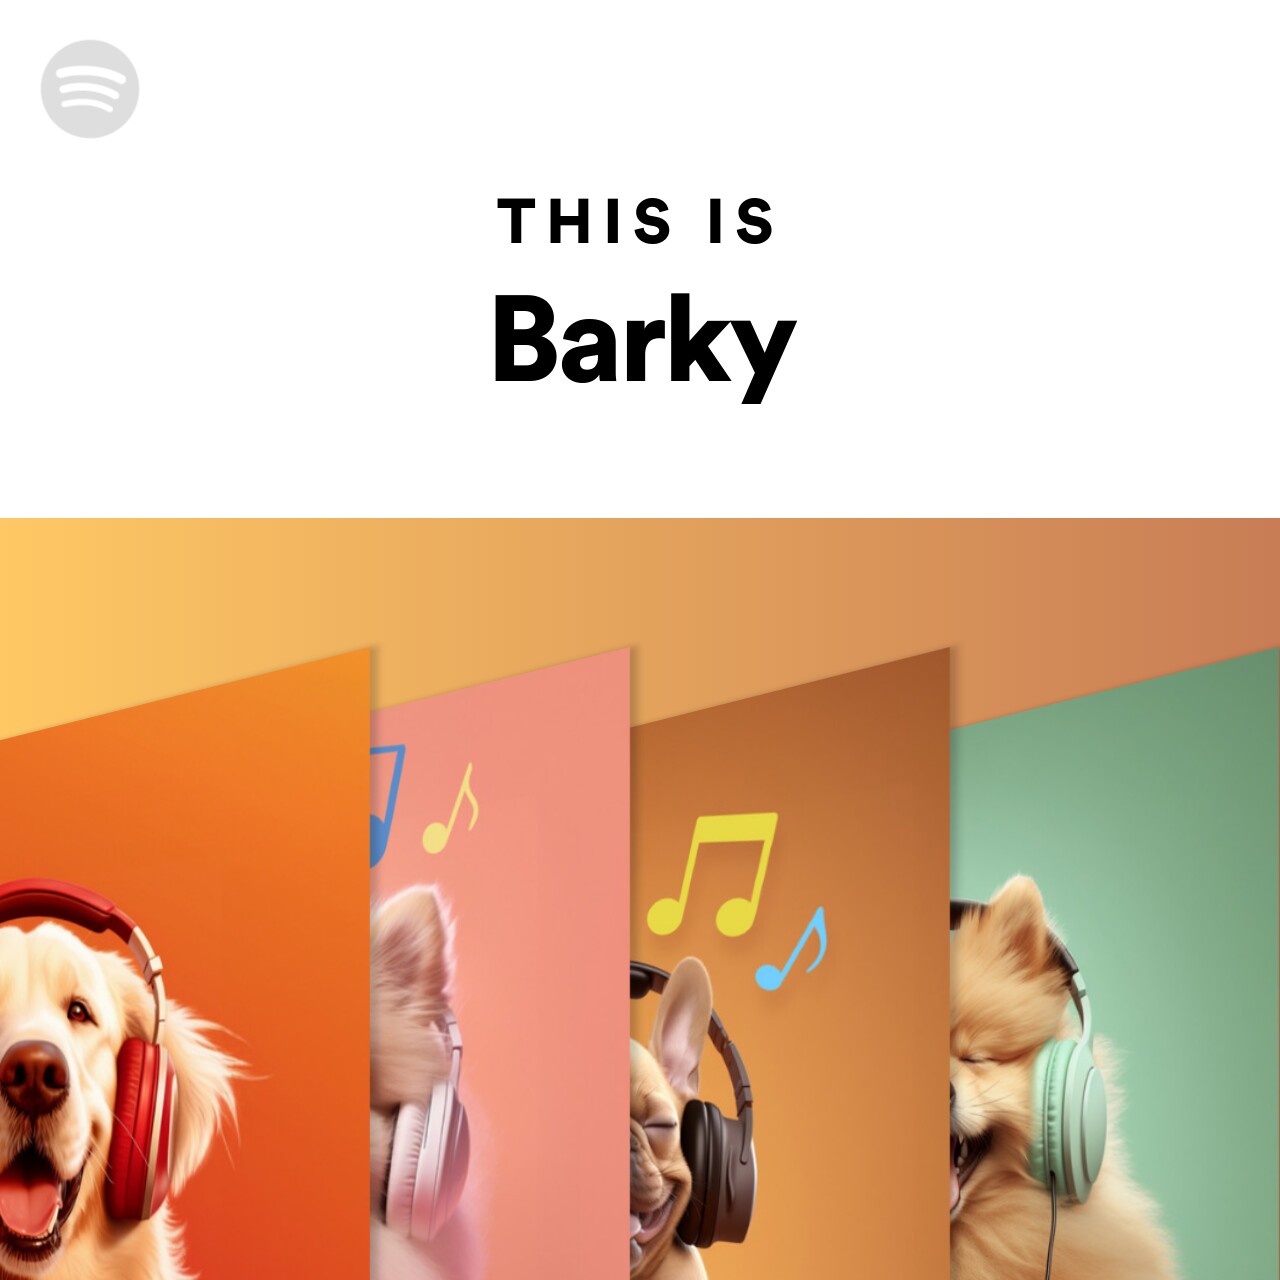 This Is Barky